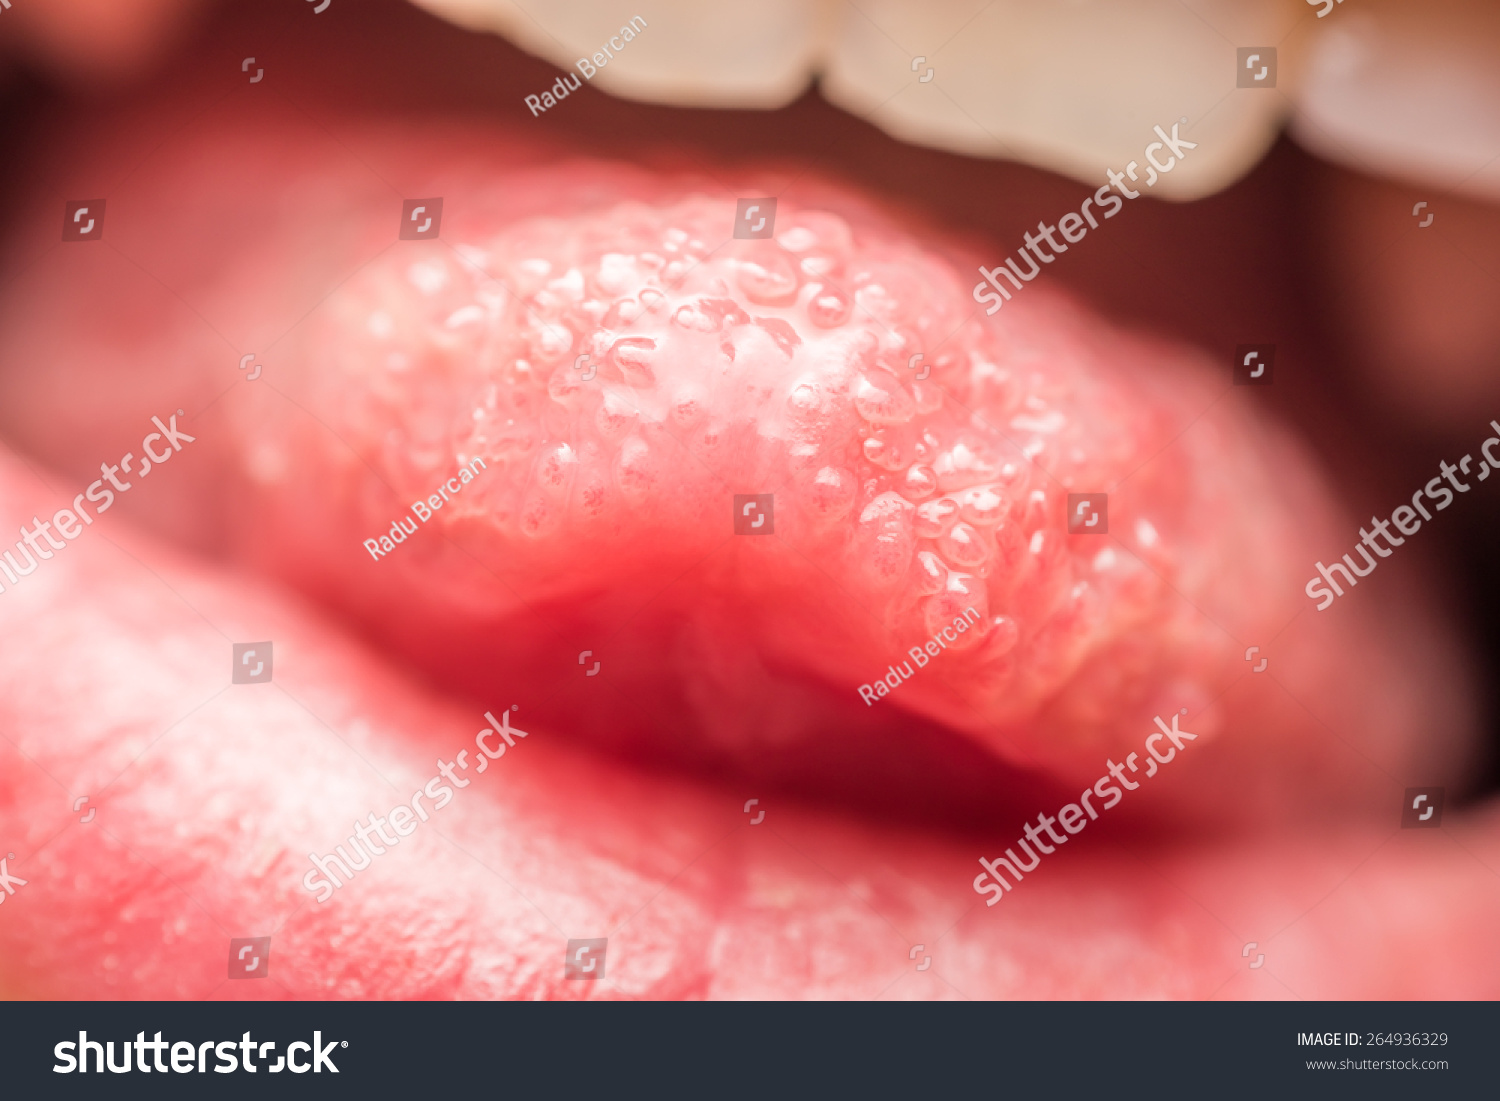 Close Up Pictures Of Human Tongue Papillae 43